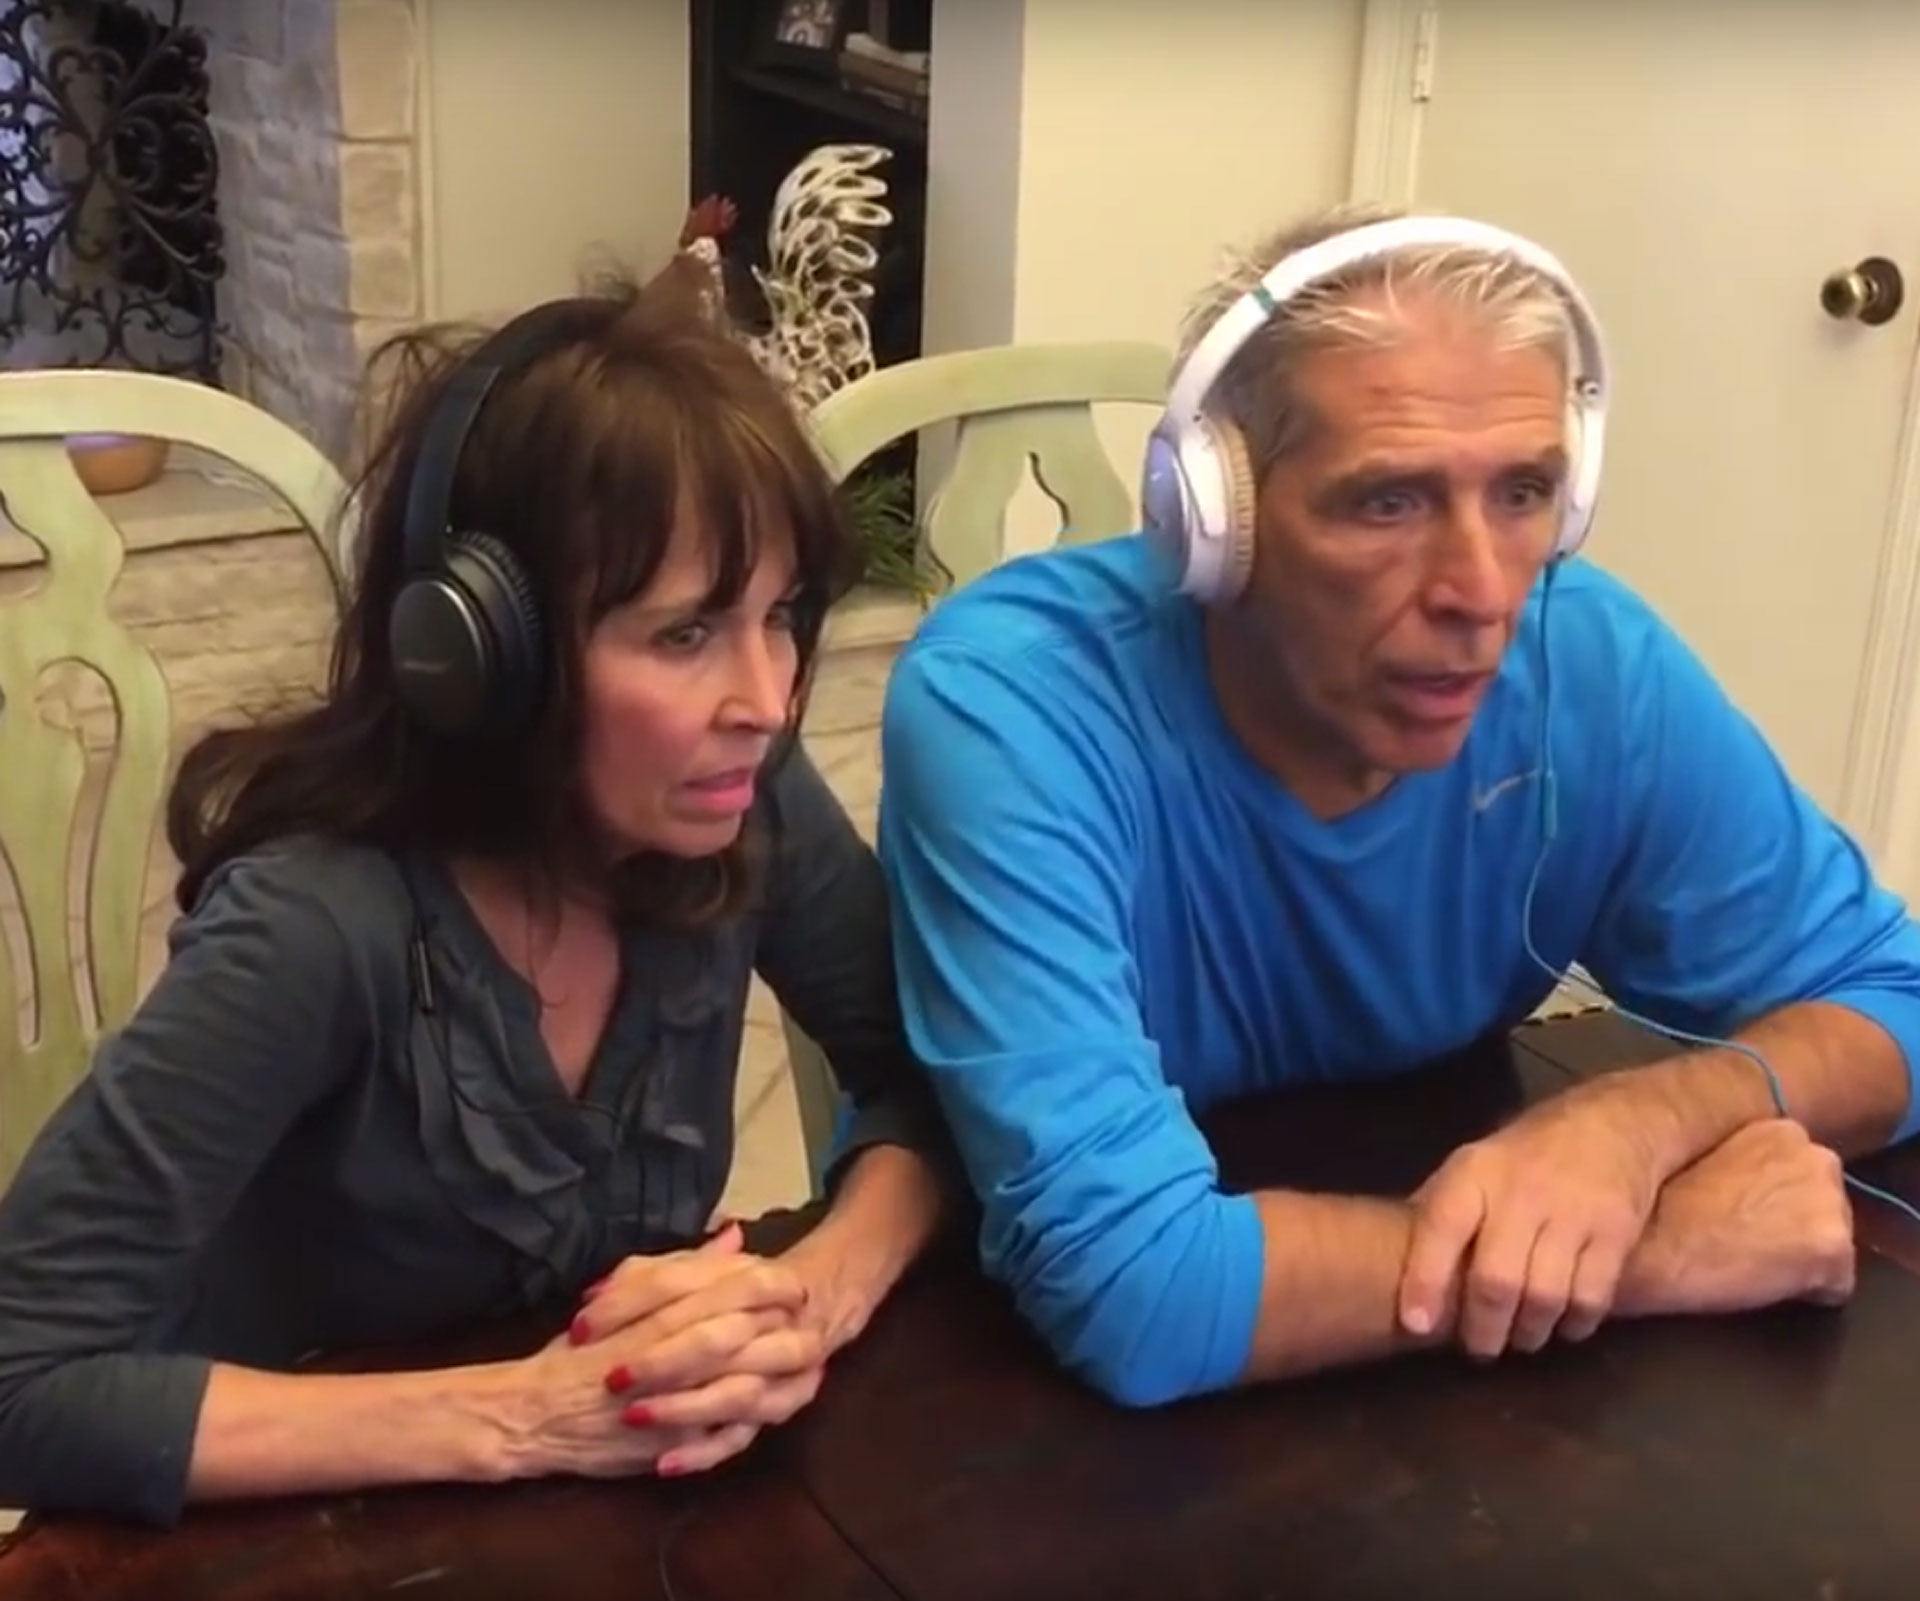 Couple wear noise cancelling headphones for daughter's pregnancy whisper challenge game.